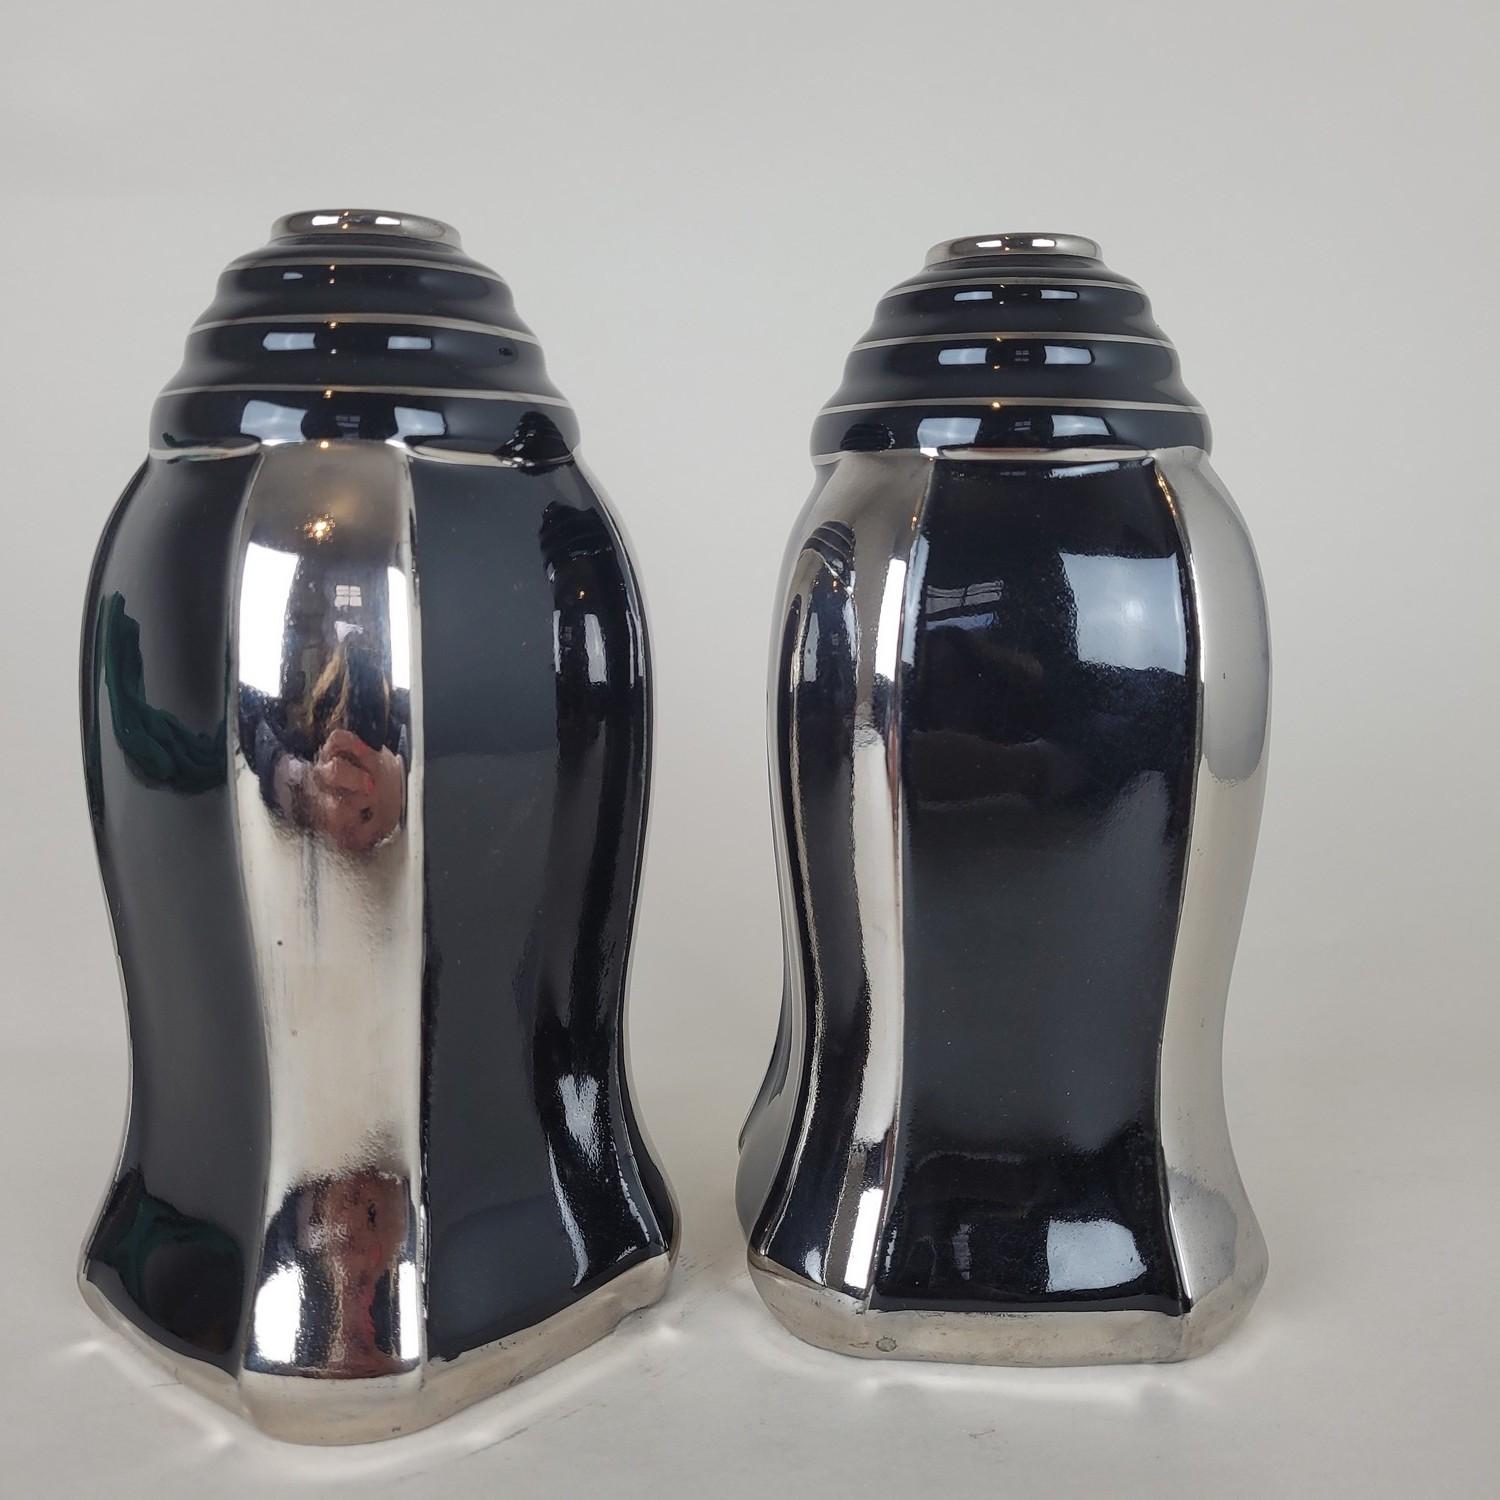 Pair of black glazed ceramic vases with silver decoration, art deco

These 2 vases bear the ODYV brand underneath, with the number 492

The ODYV brand is a collection of art deco objects produced between 1929 and 1939 by the Berlot-Mussier factory